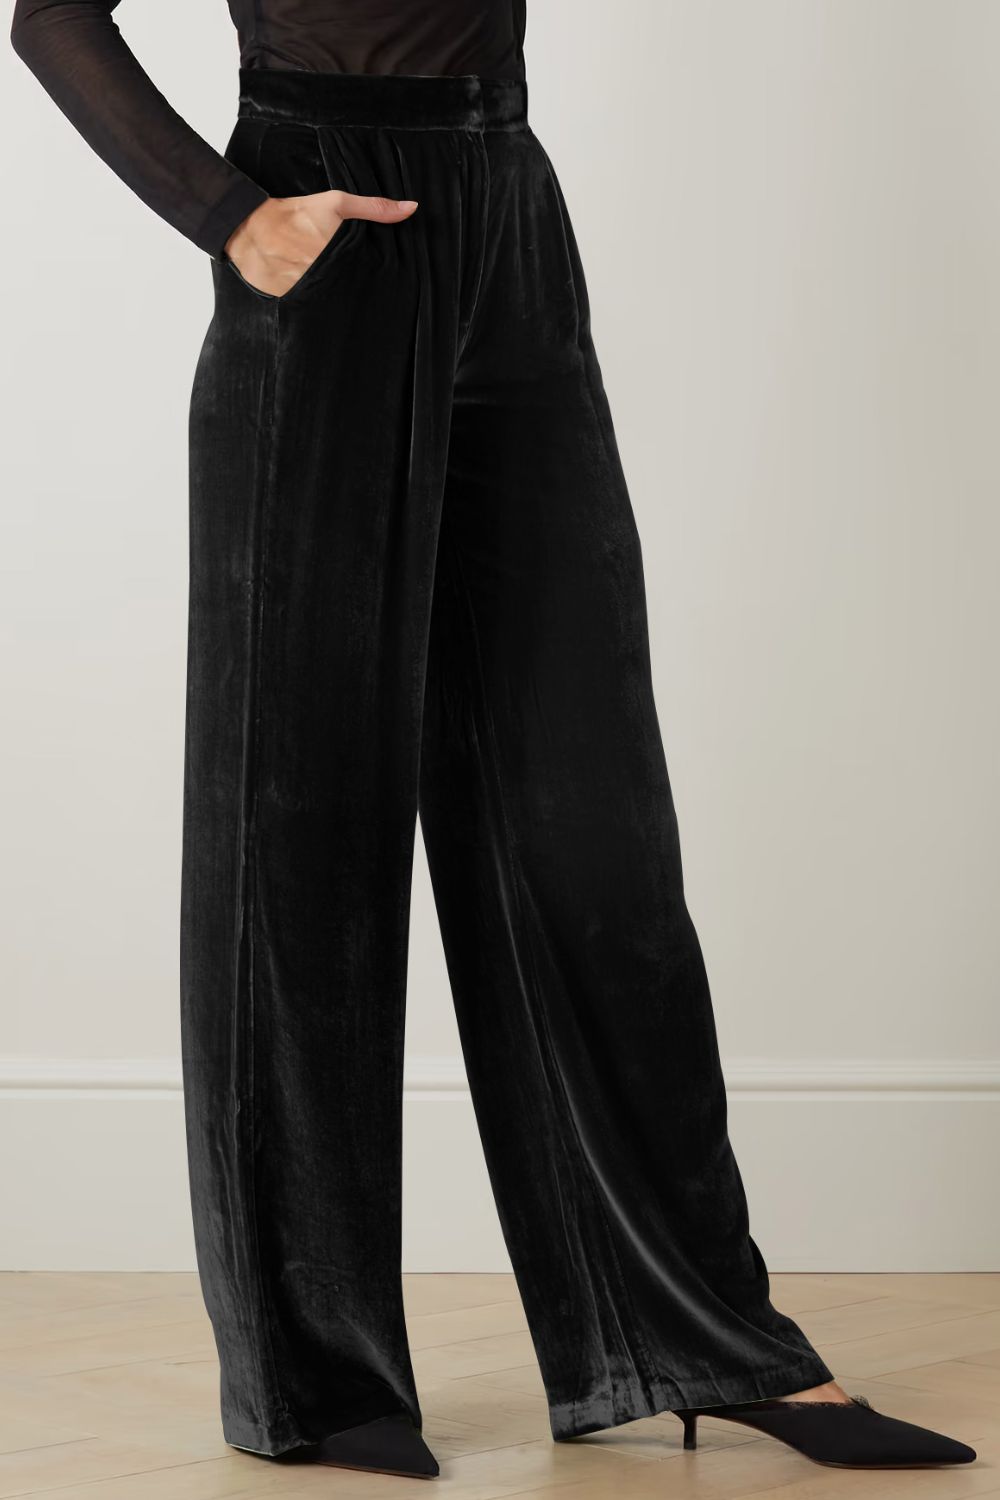 Loose Fit High Waist Long Pants with Pockets - Bottoms - Pants - 8 - 2024